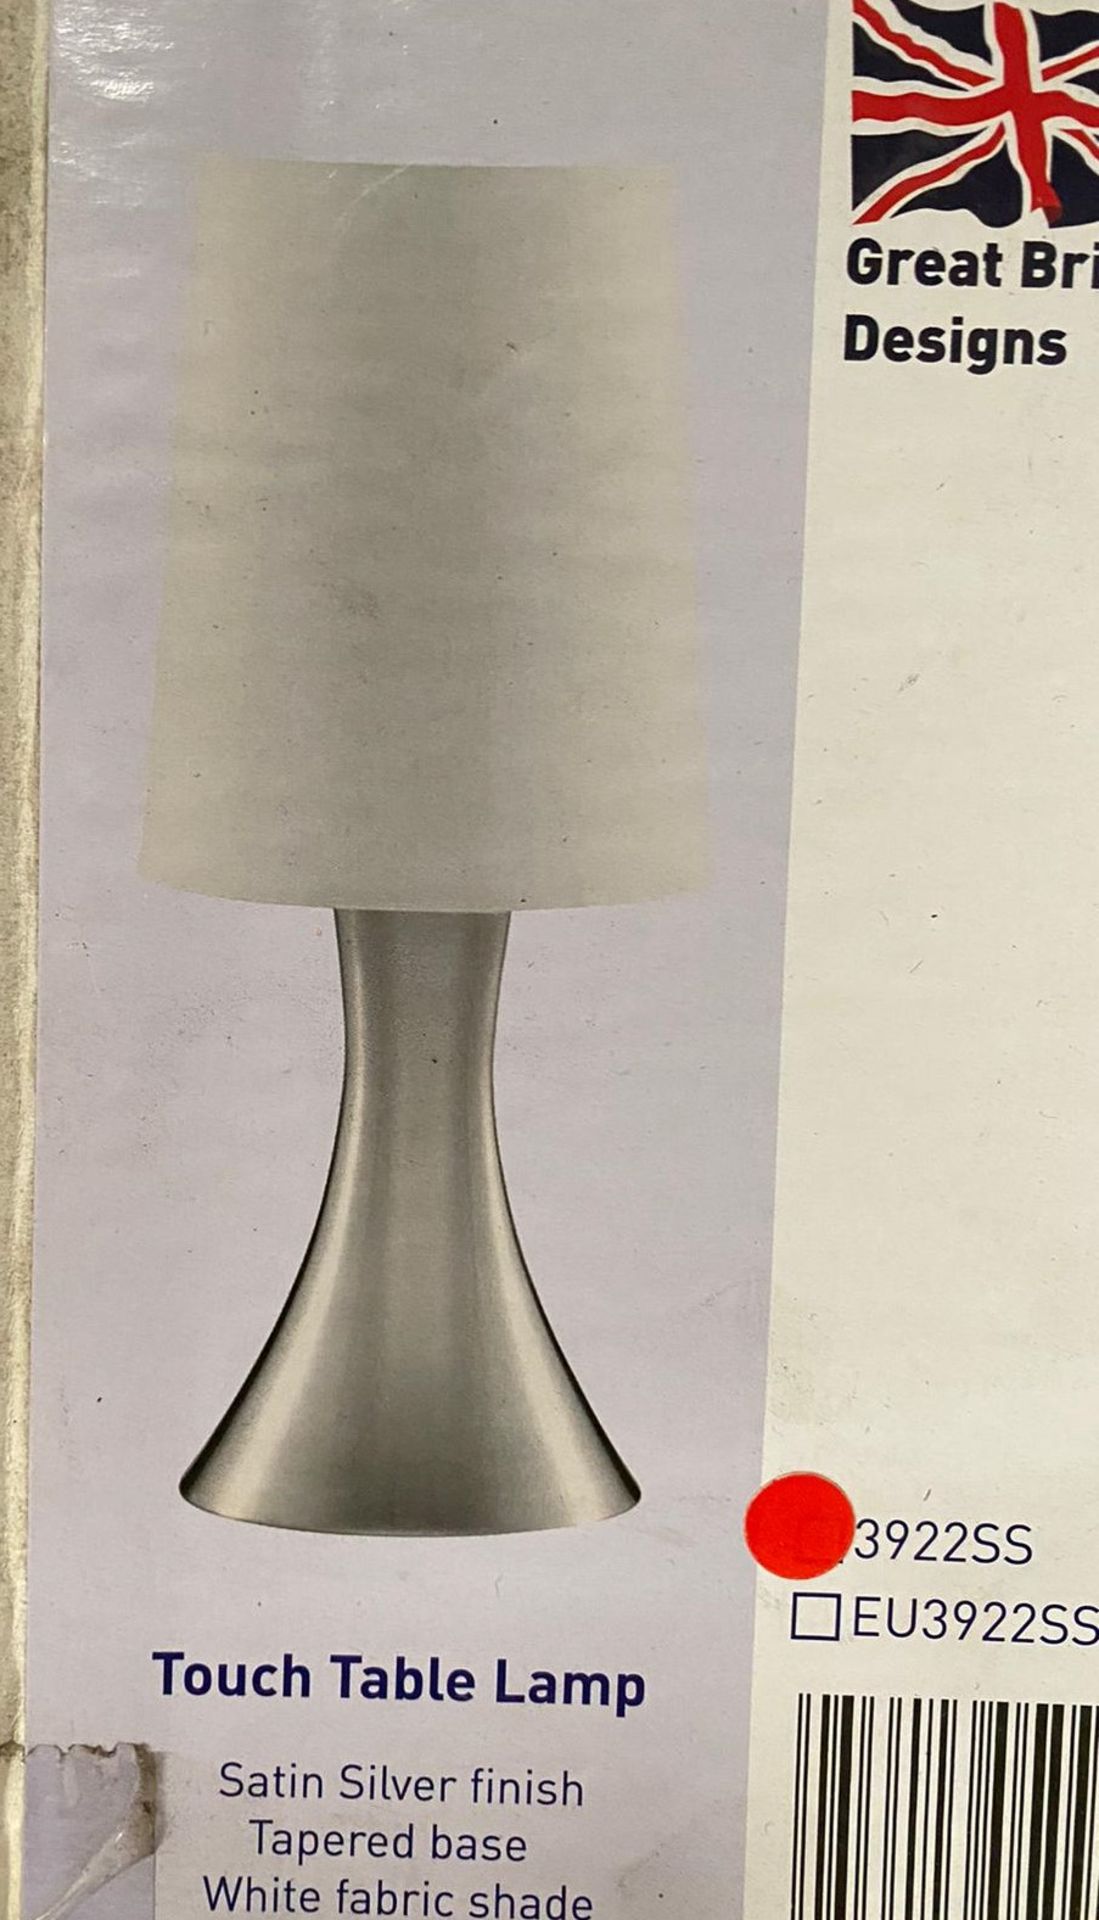 1 x Searchlight Touch Table Lamp in satin silver - Ref: 3922SS - New and Boxed Stock - - Image 4 of 4